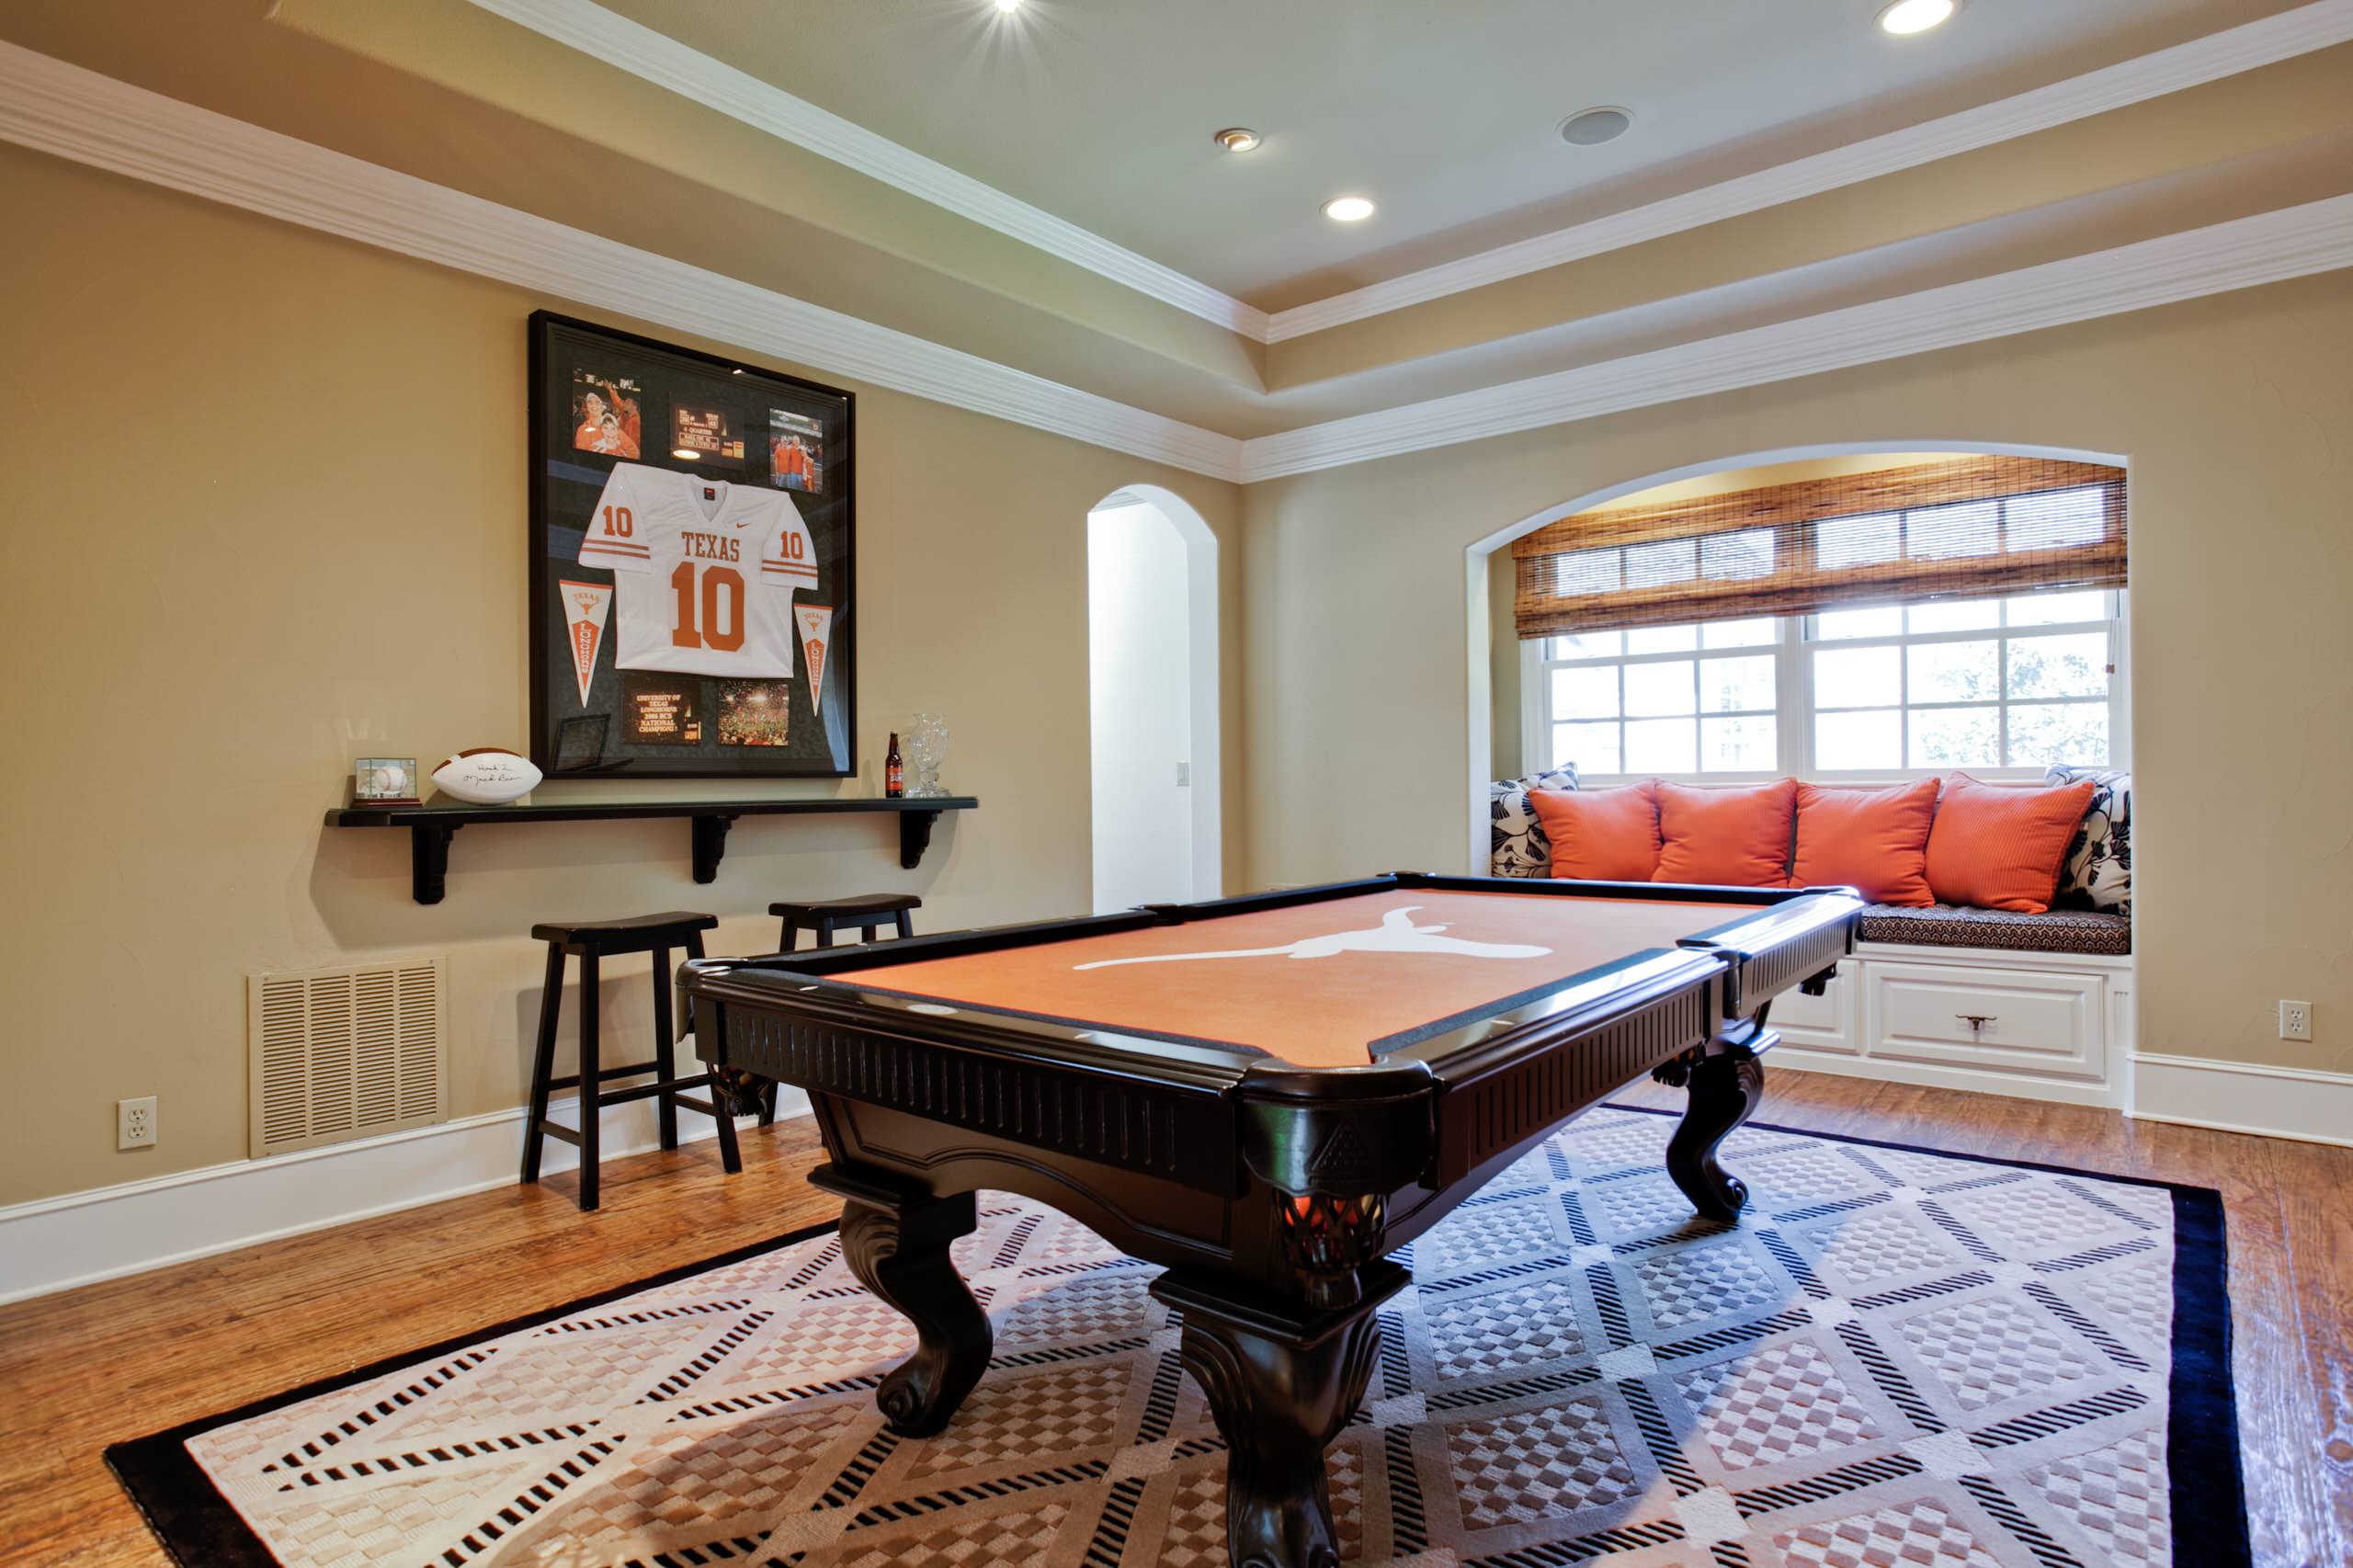 Rug Under Pool Table Houzz, Pool Table Rugs